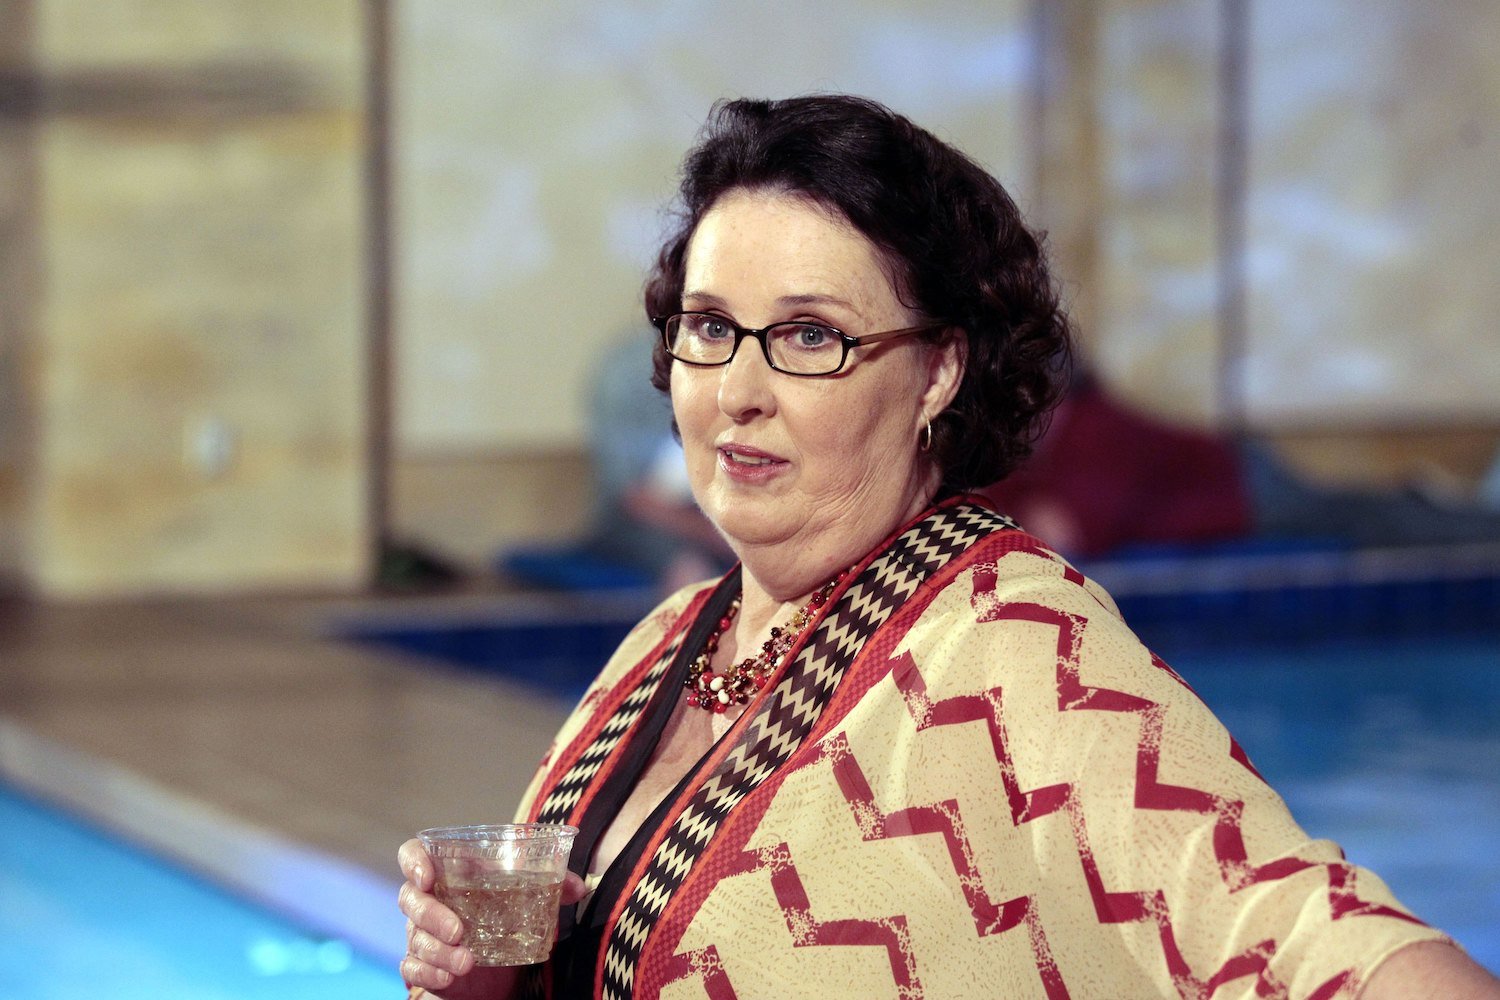 Phyllis Smith as Phyllis Lapin on 'The Office'